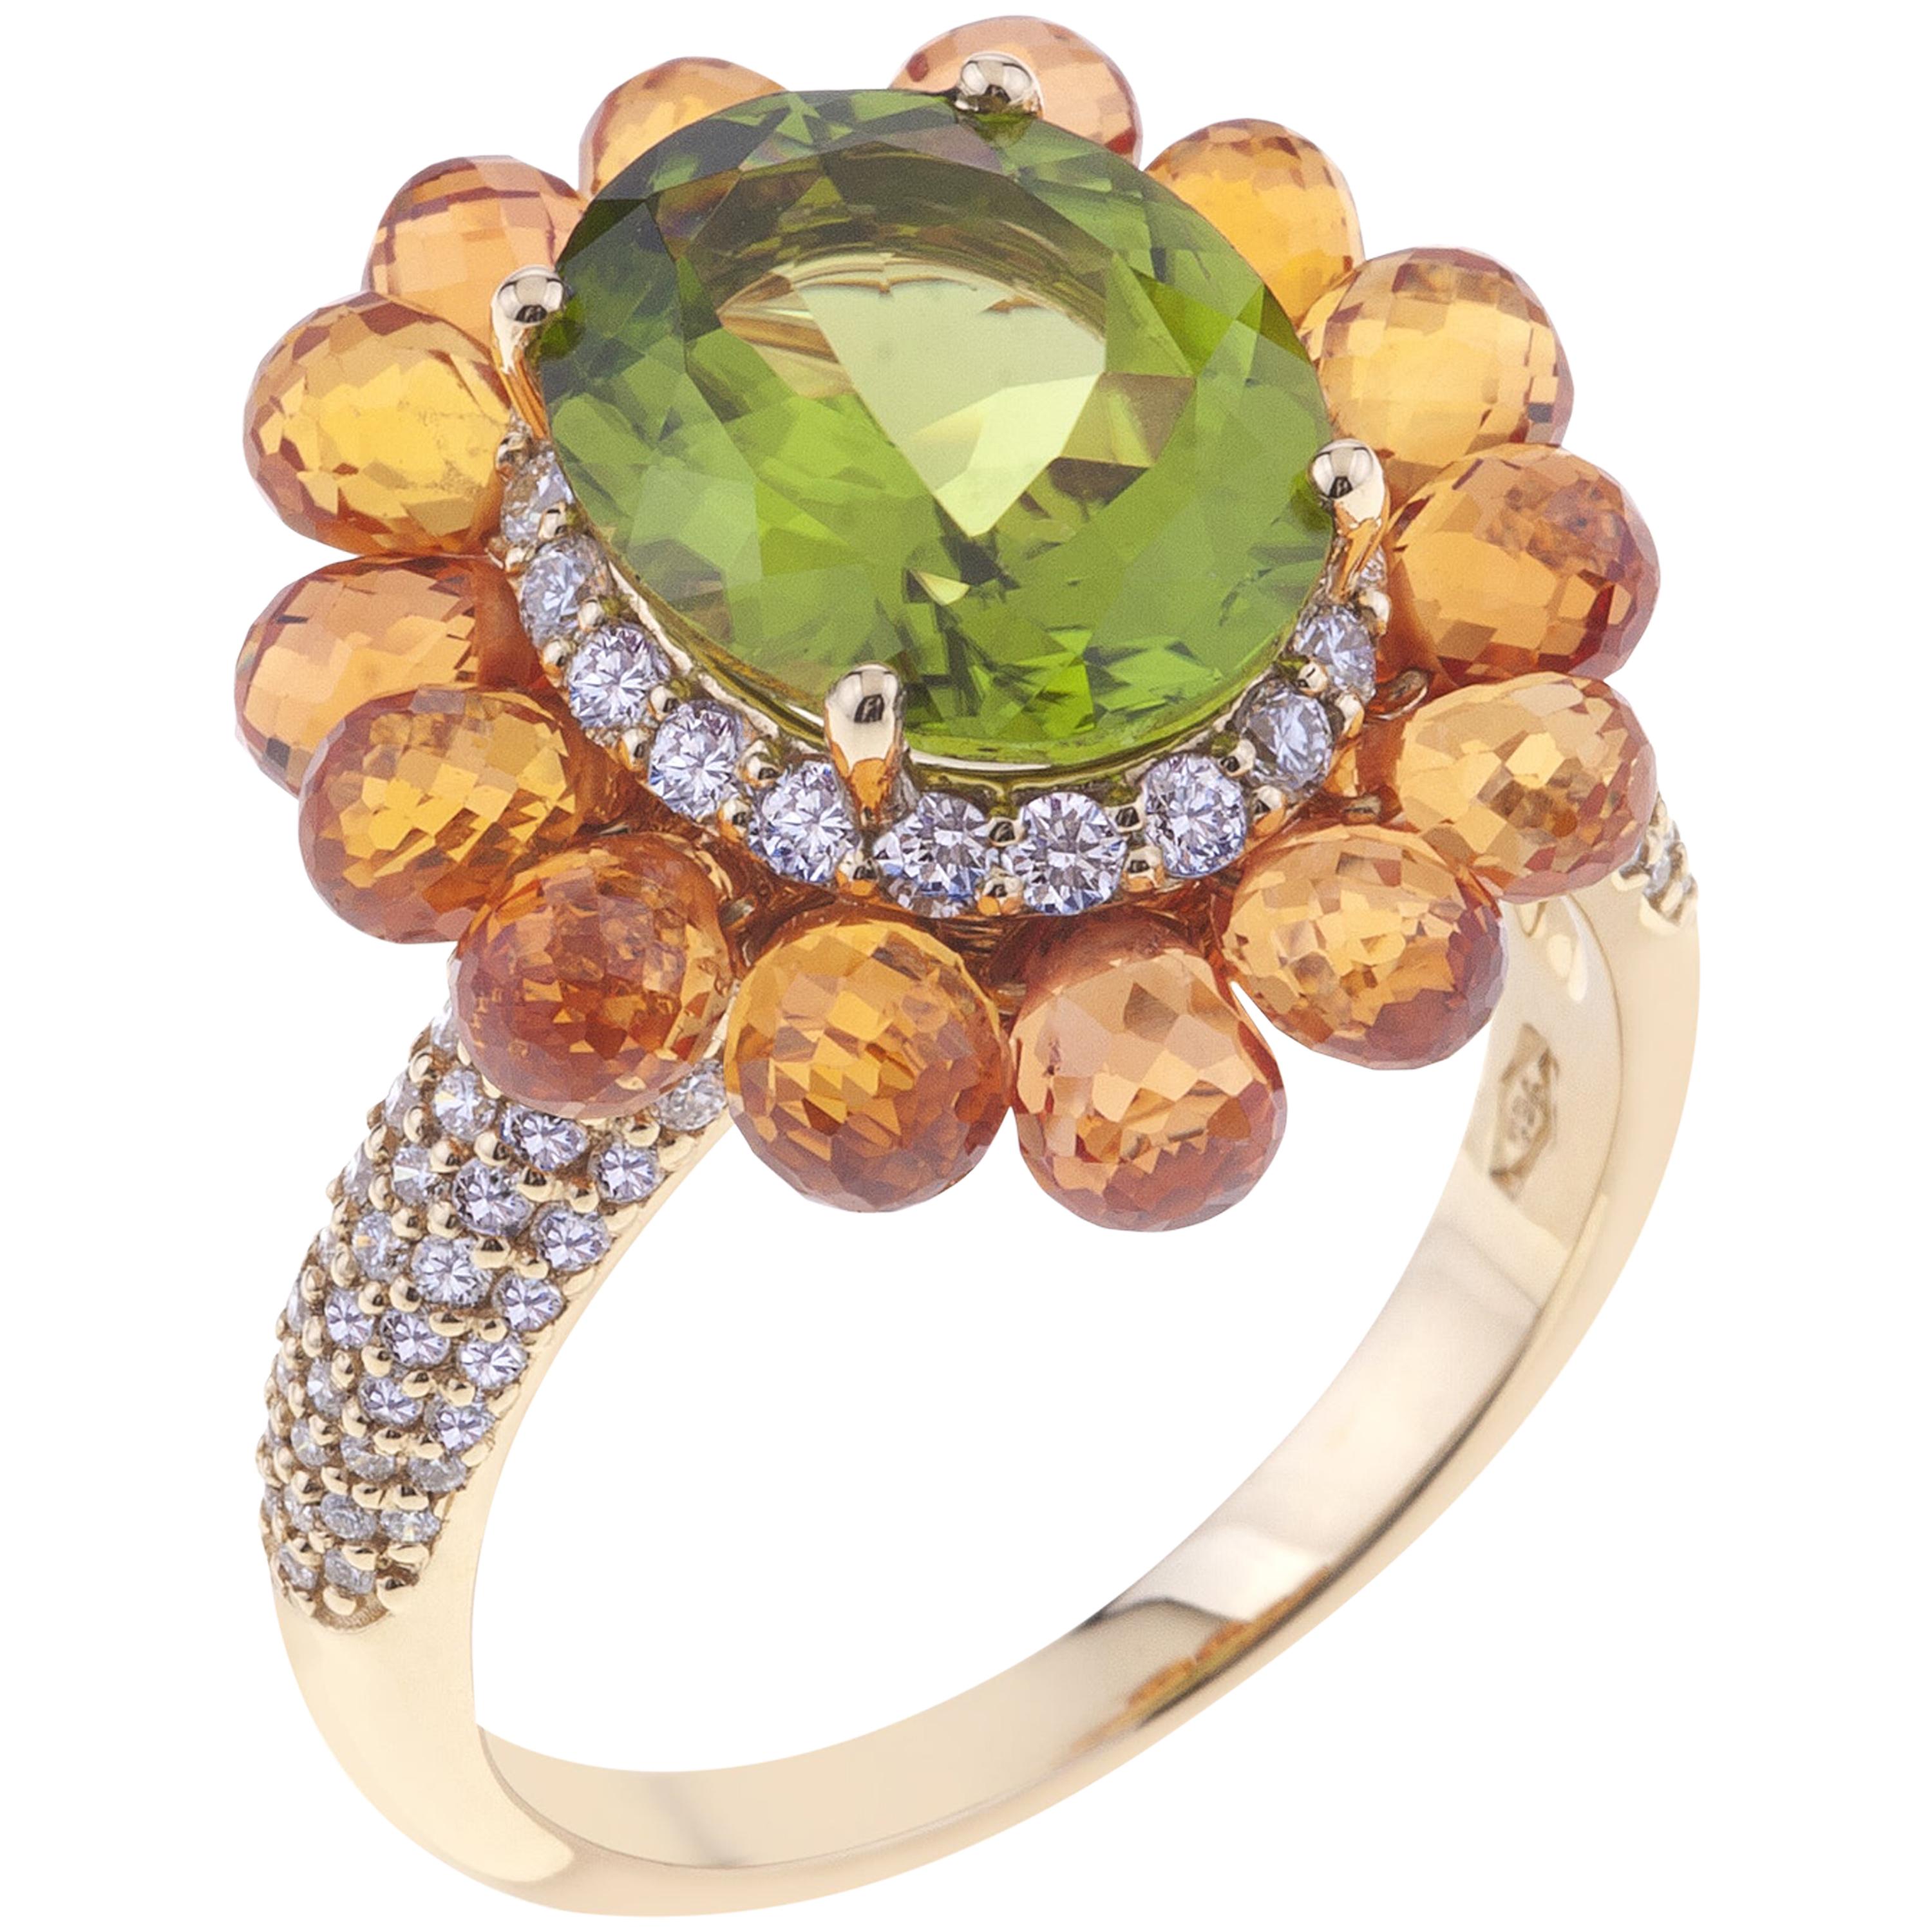 Flower Ring Gold with Oval Peridot, Orange Sapphires, and Diamonds